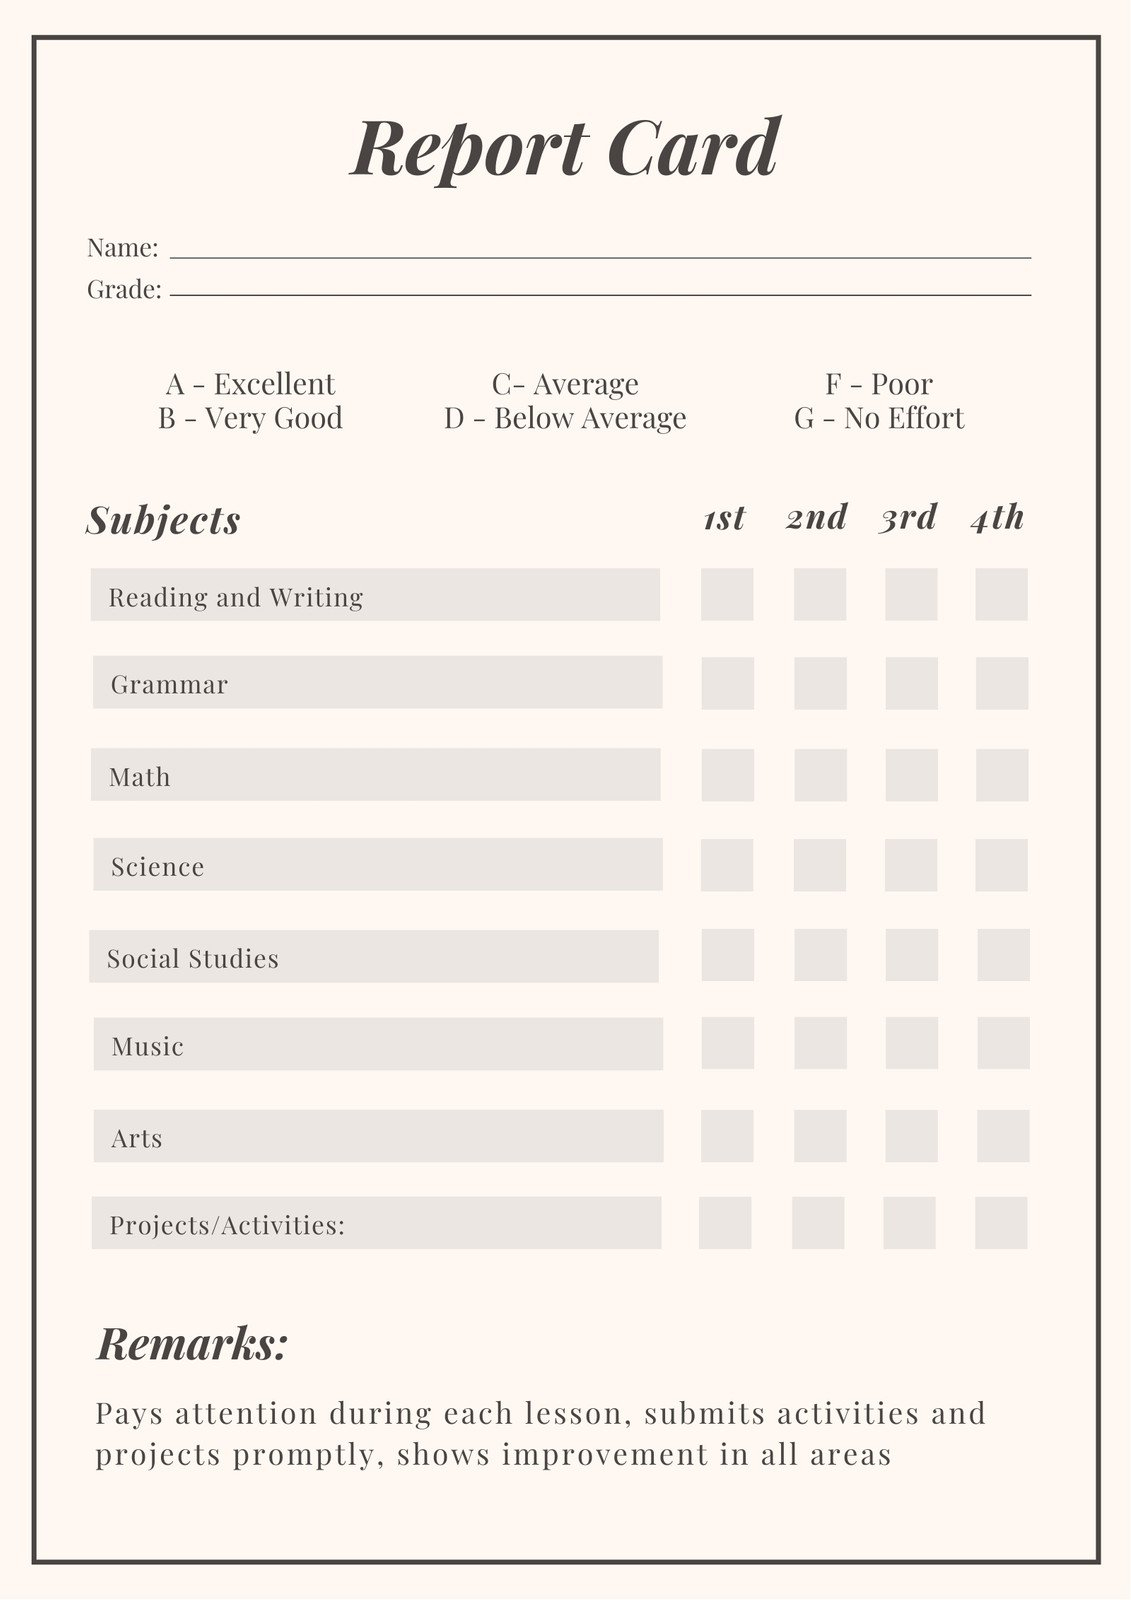 Free, printable, customizable report card templates  Canva Throughout Report Card Template Pdf